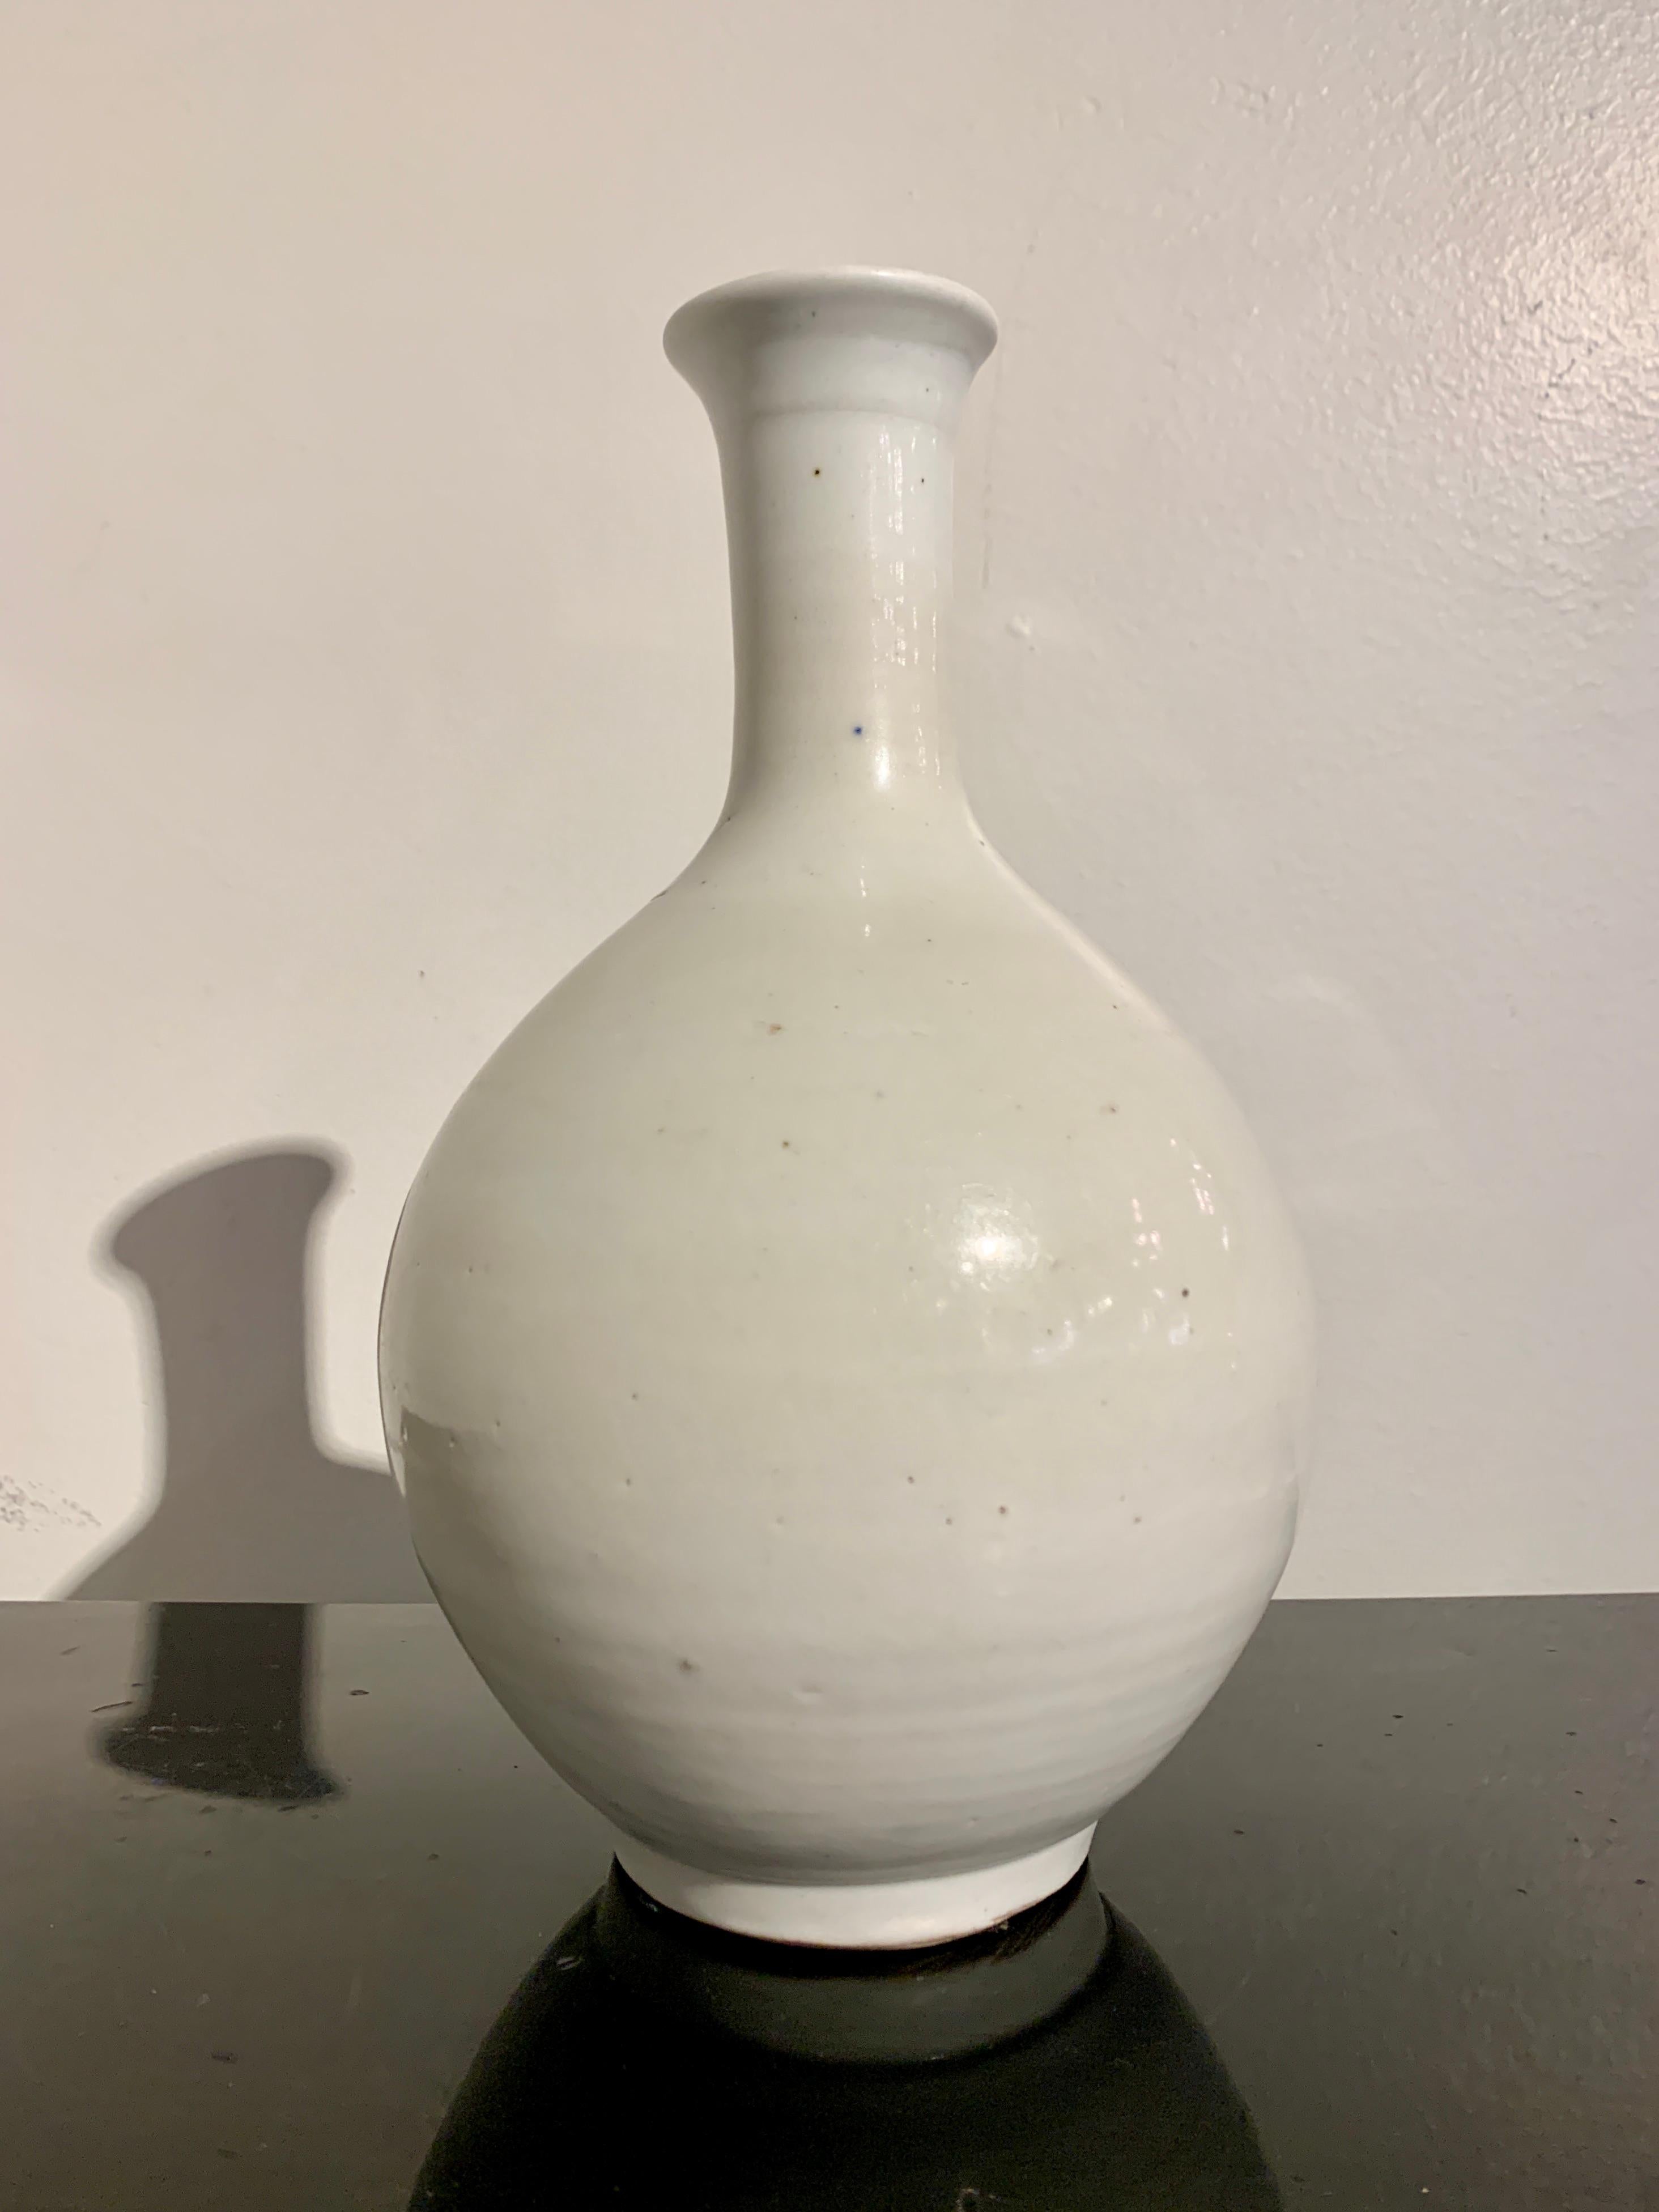 A quiet and elegant Korean white glazed bottle vase, Joseon Dynasty, late 18th century, Korea.

The graceful vase beautifully proportioned, resting on a short recessed foot, with a globular body, narrow neck, and slightly everted mouth. The entire